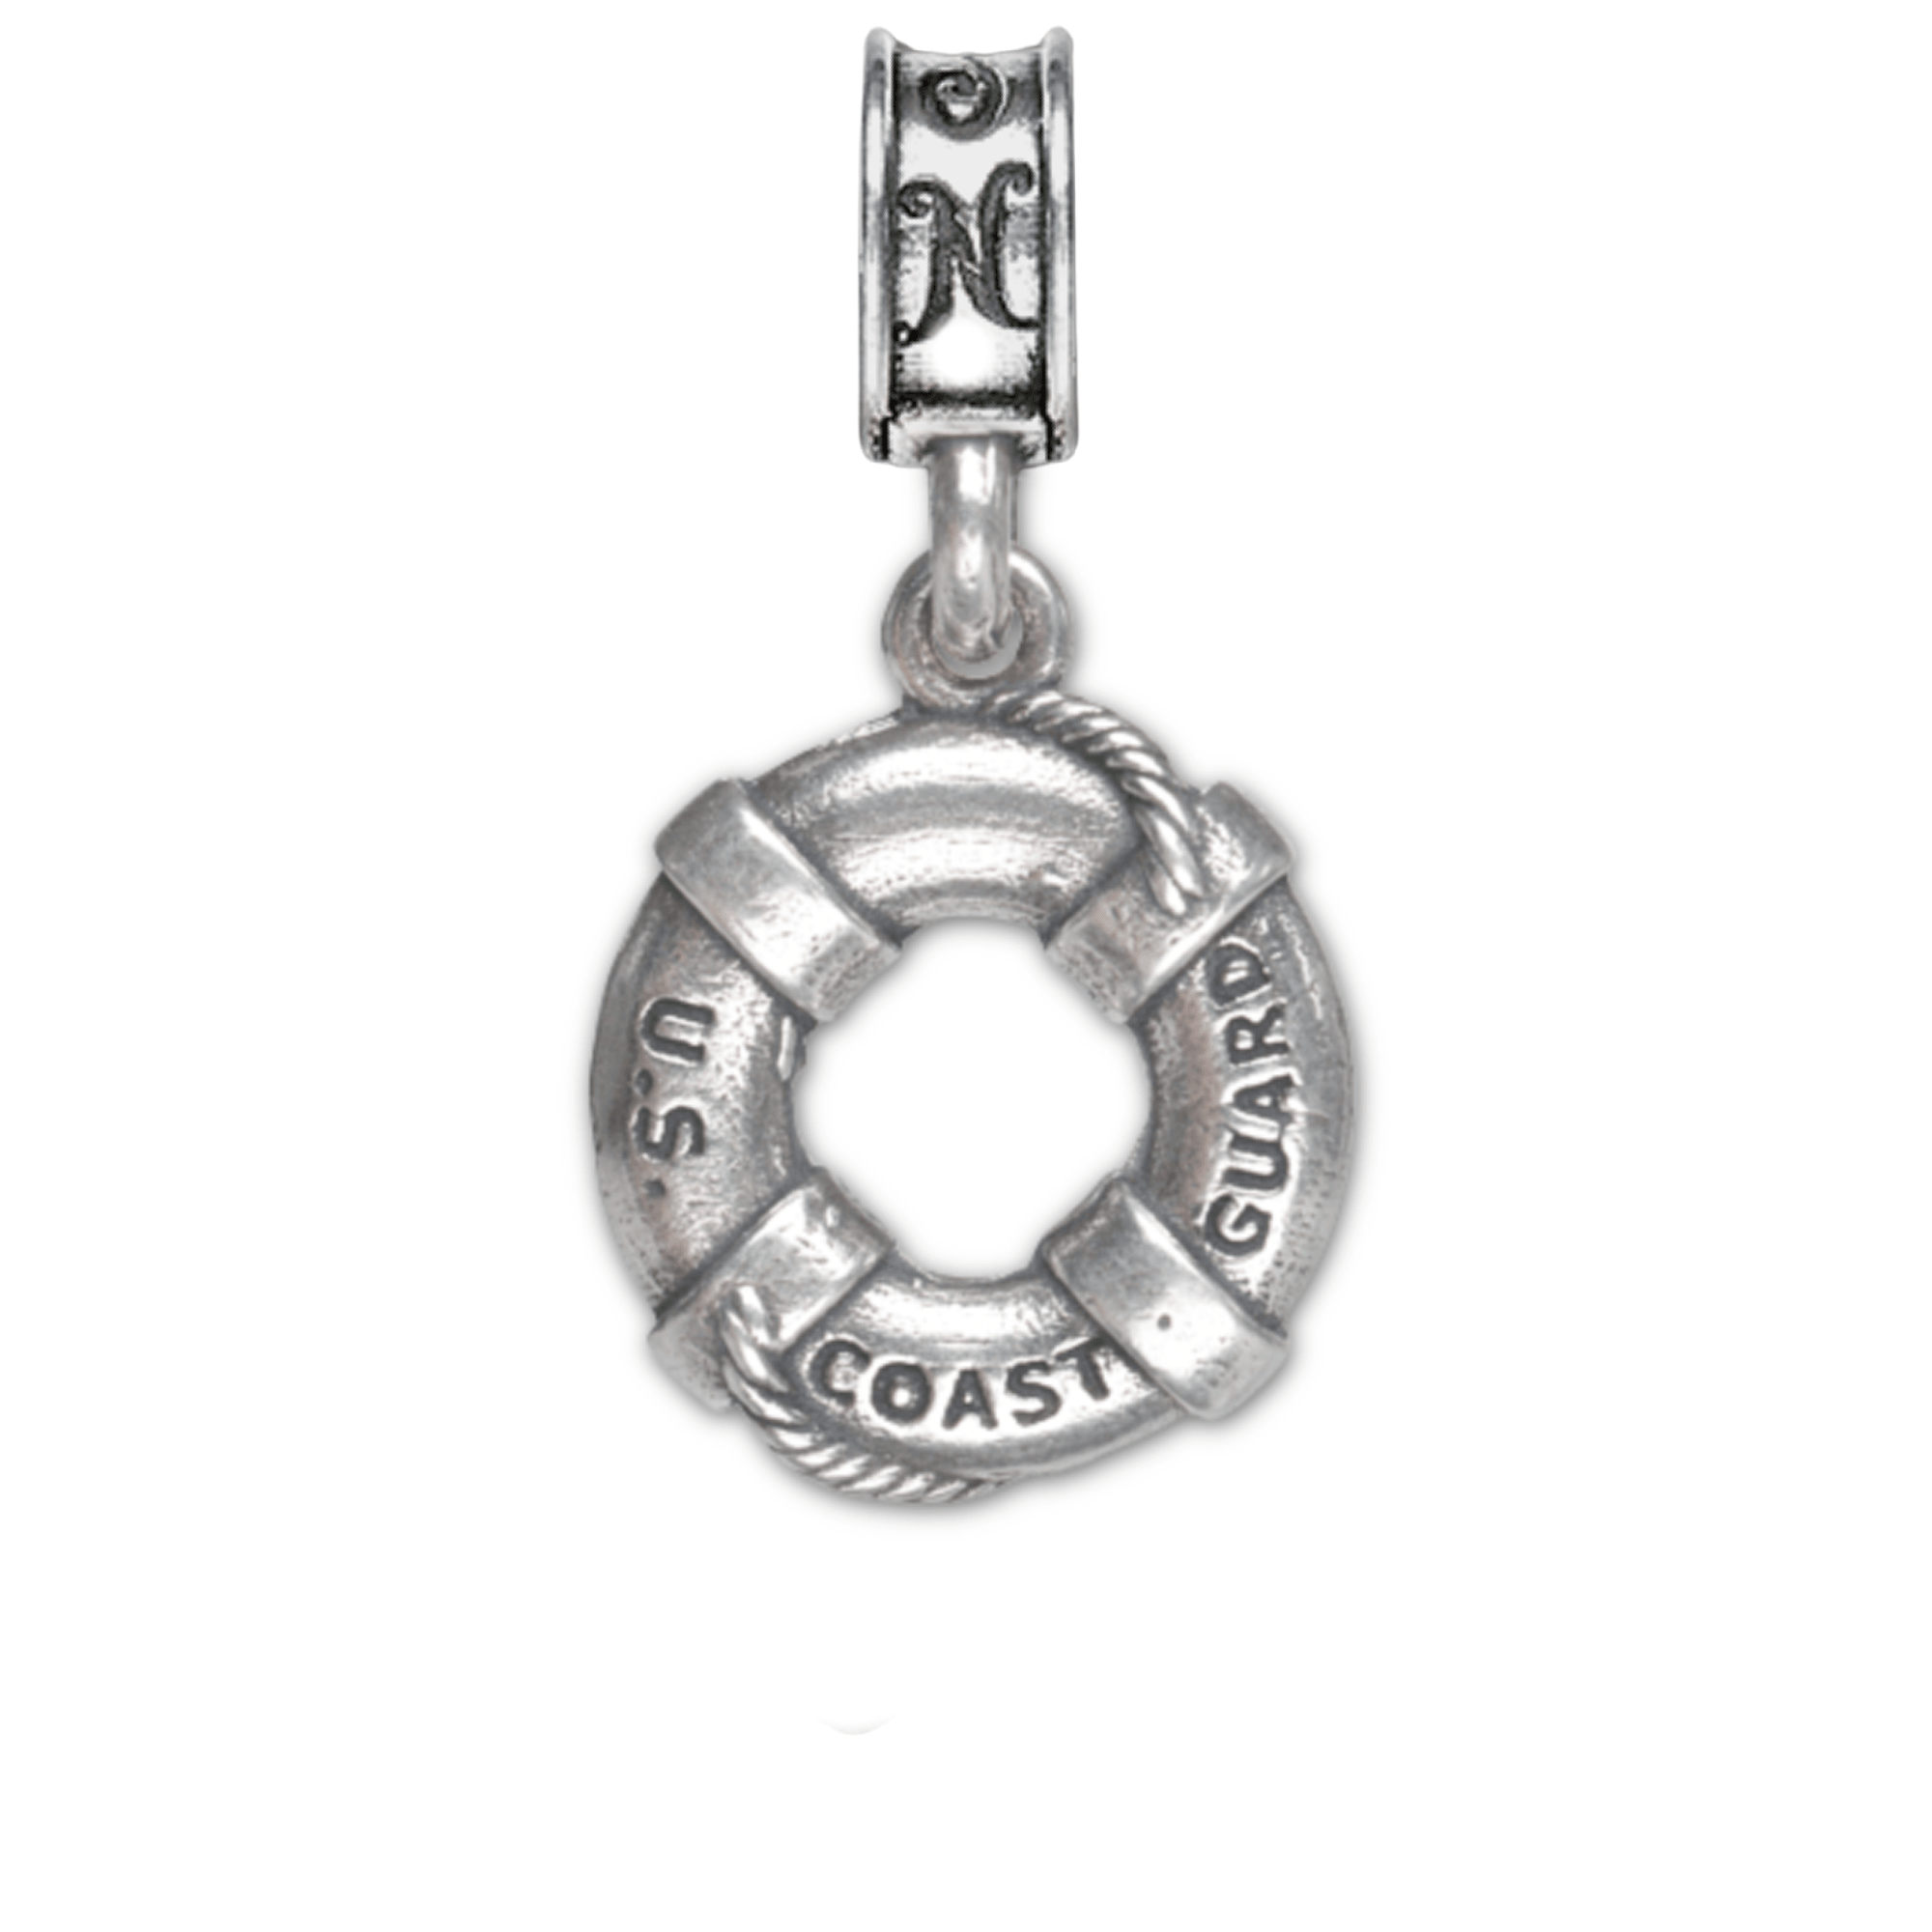 Military Jewelry, Military Charms, Military Gifts, United States Coast Guard, USCG Life Preserver